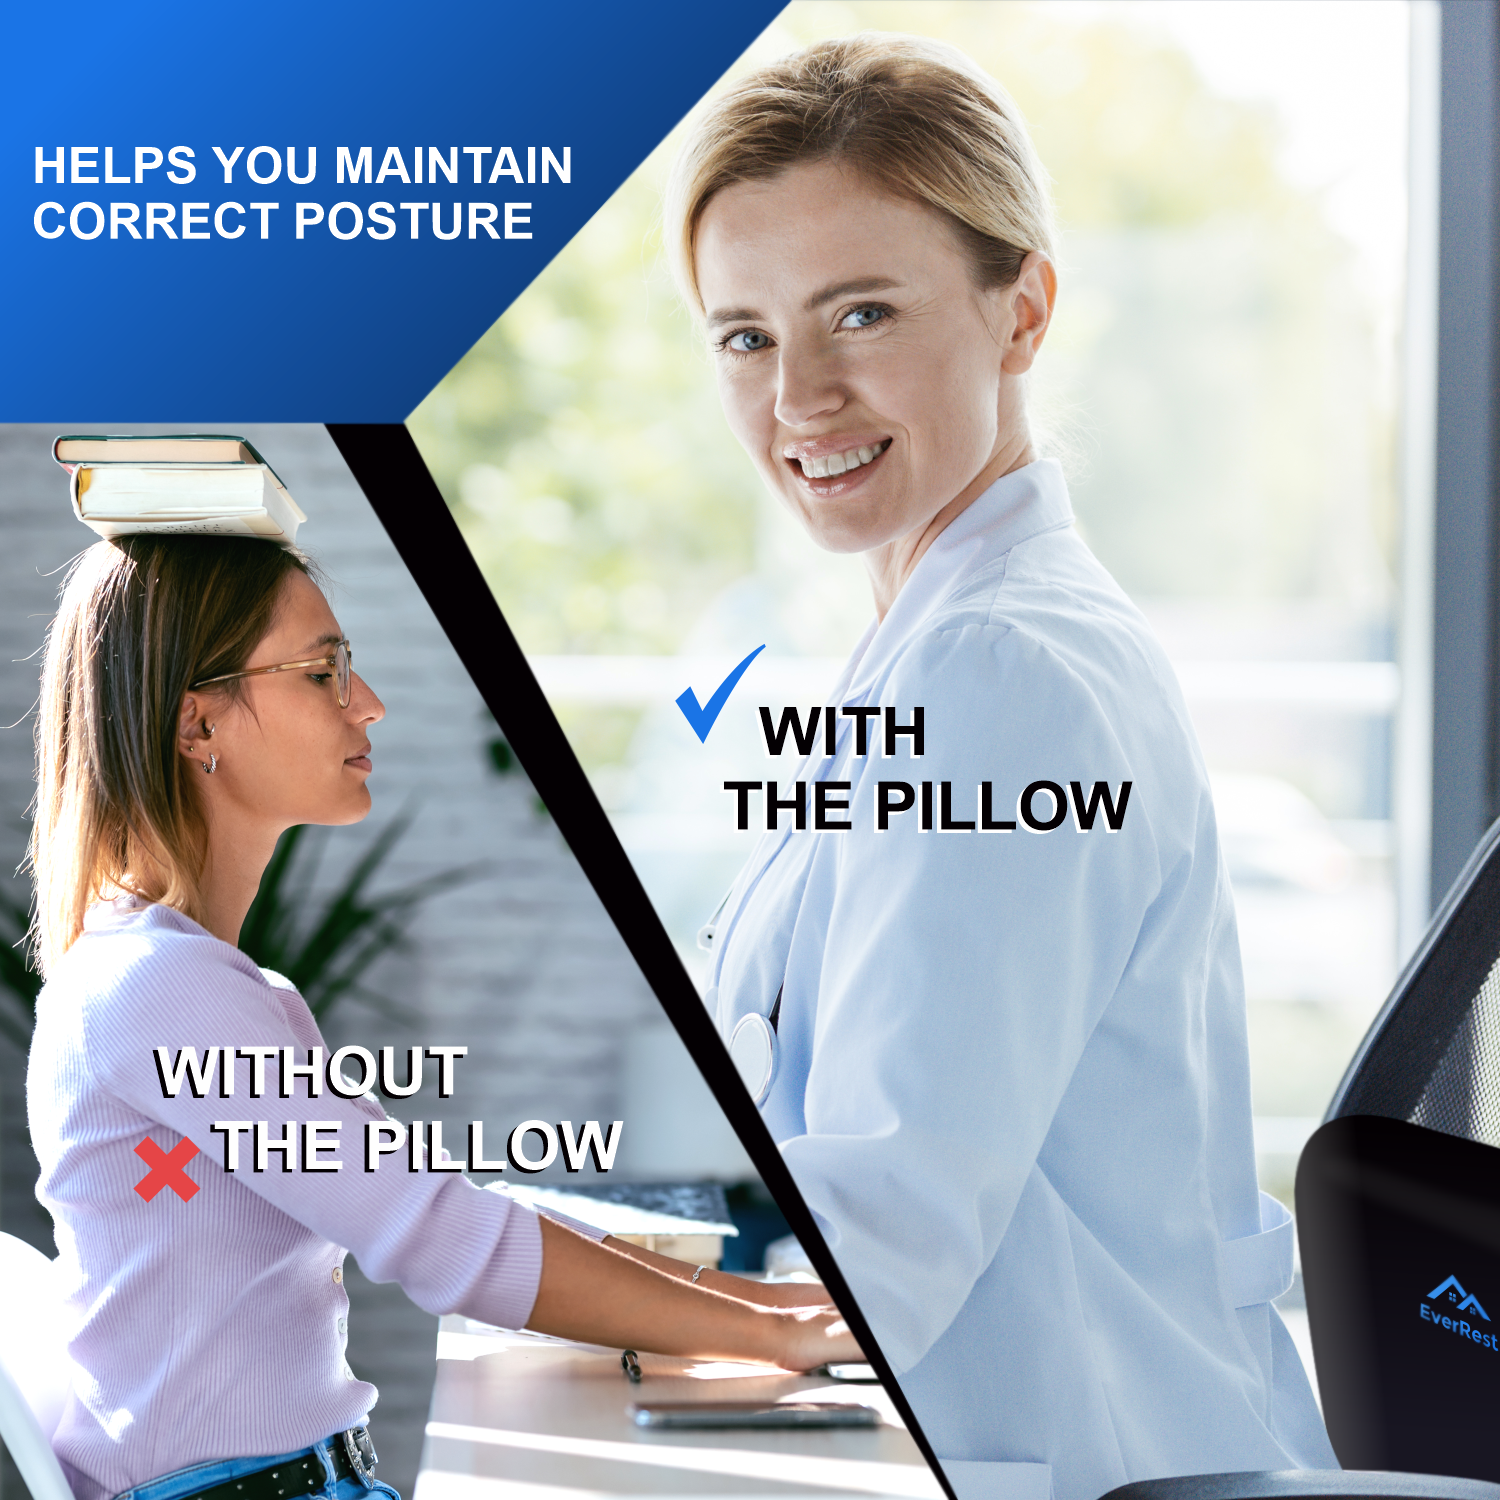 lower back support pillow correct posture